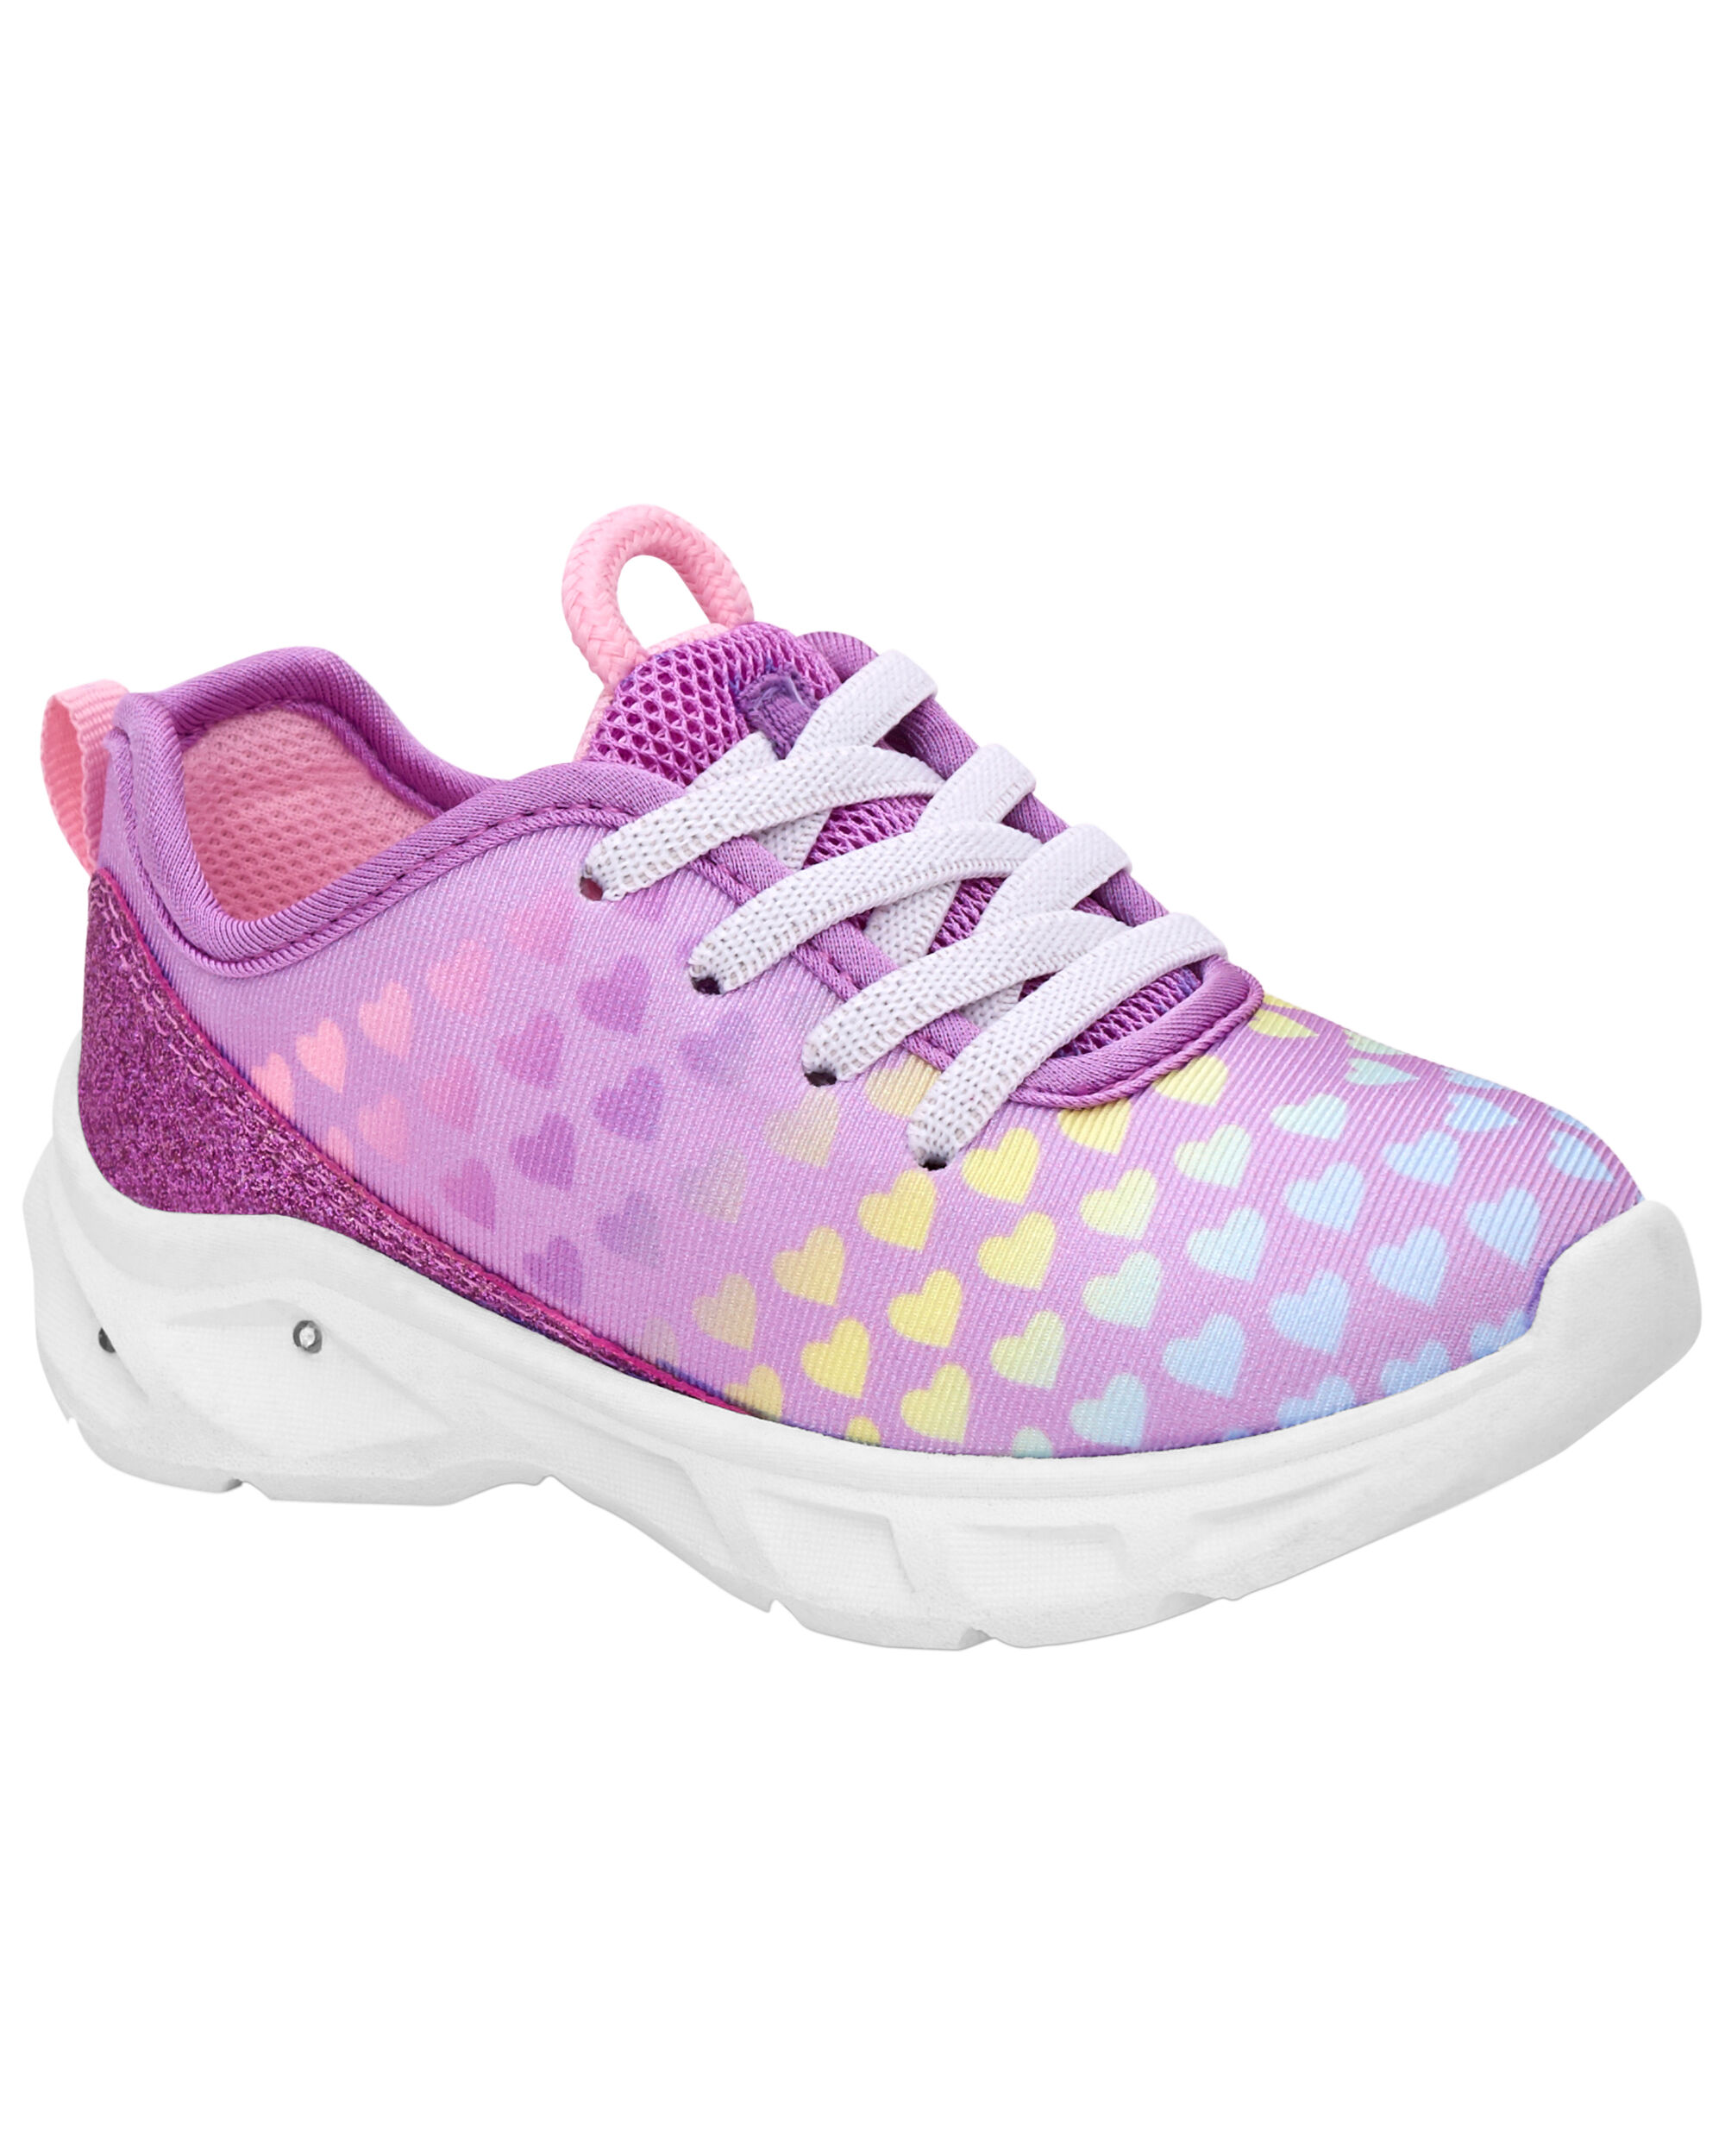 Carters Light-Up Athletic Sneakers